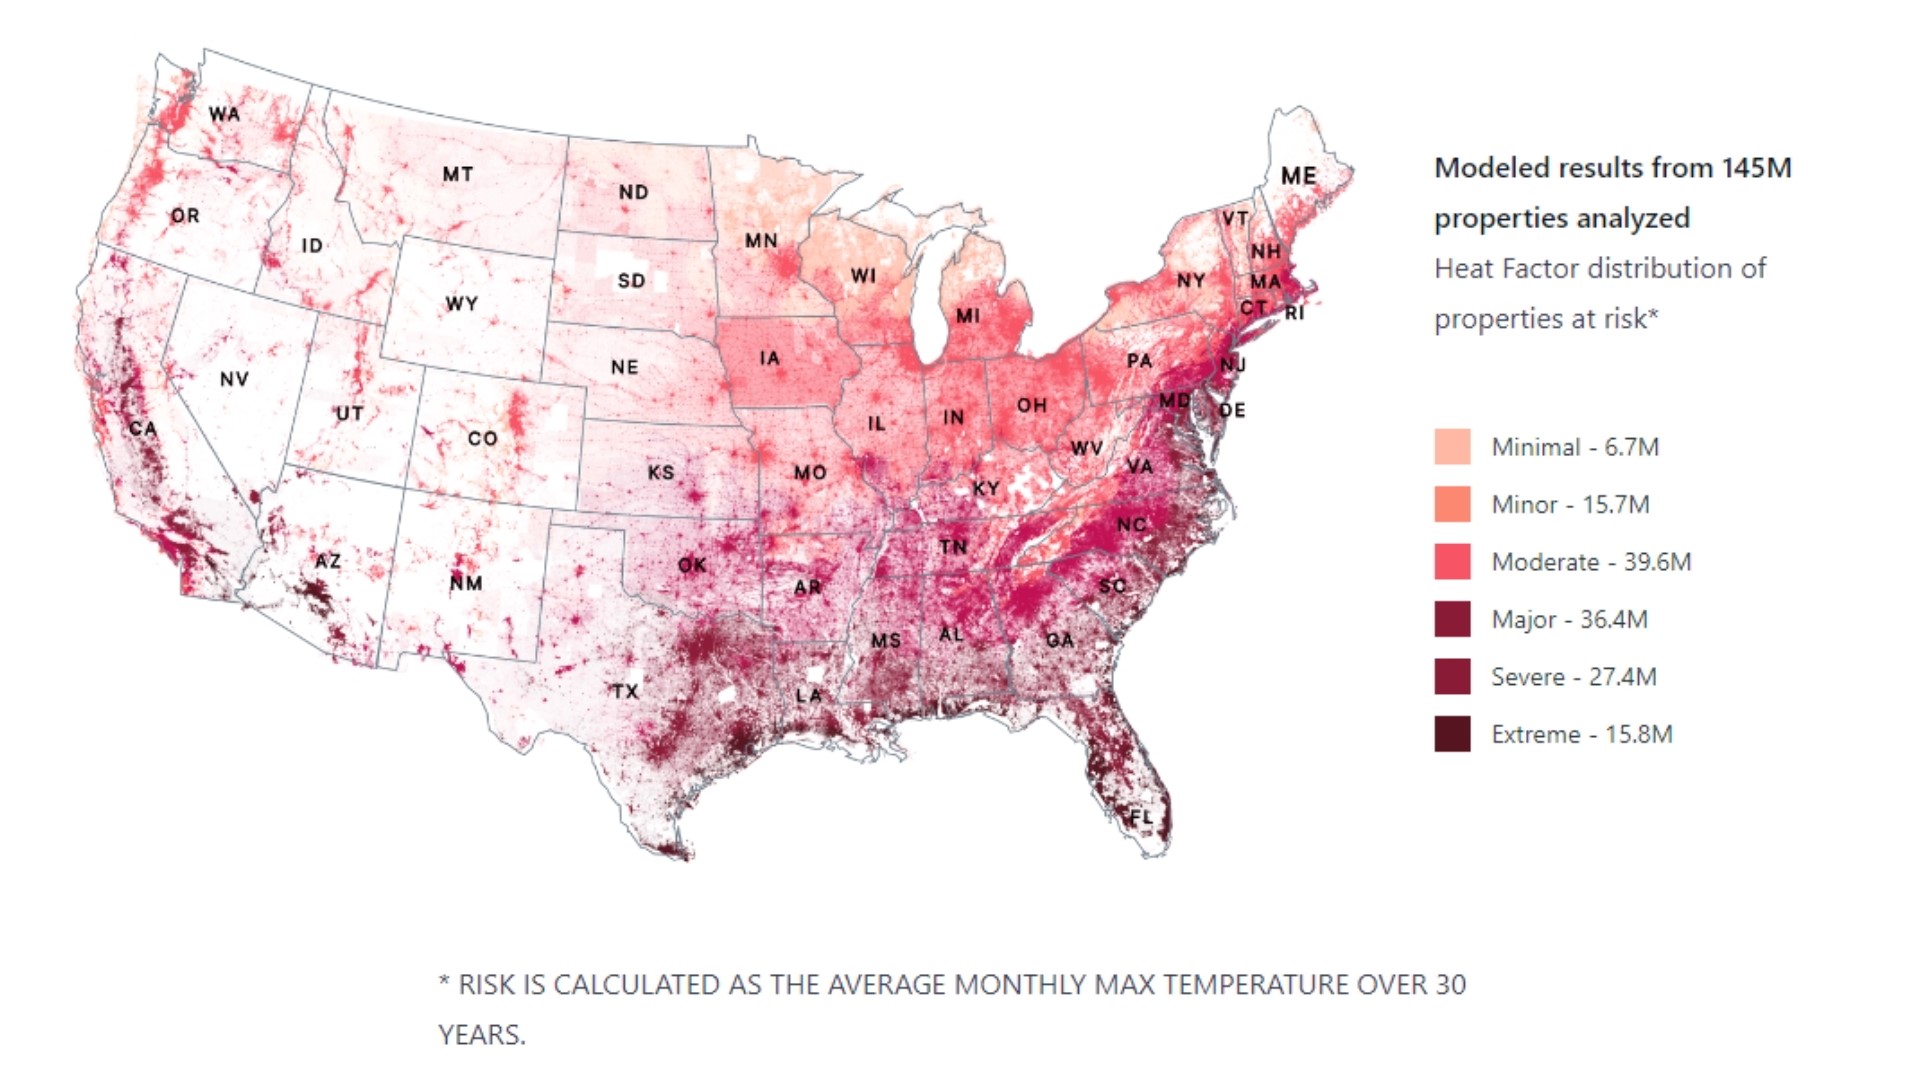 The tool, based on modeling by the nonprofit First Street Foundation, identifies risks for extreme heat, flood and wildfires in different cities and neighborhoods.